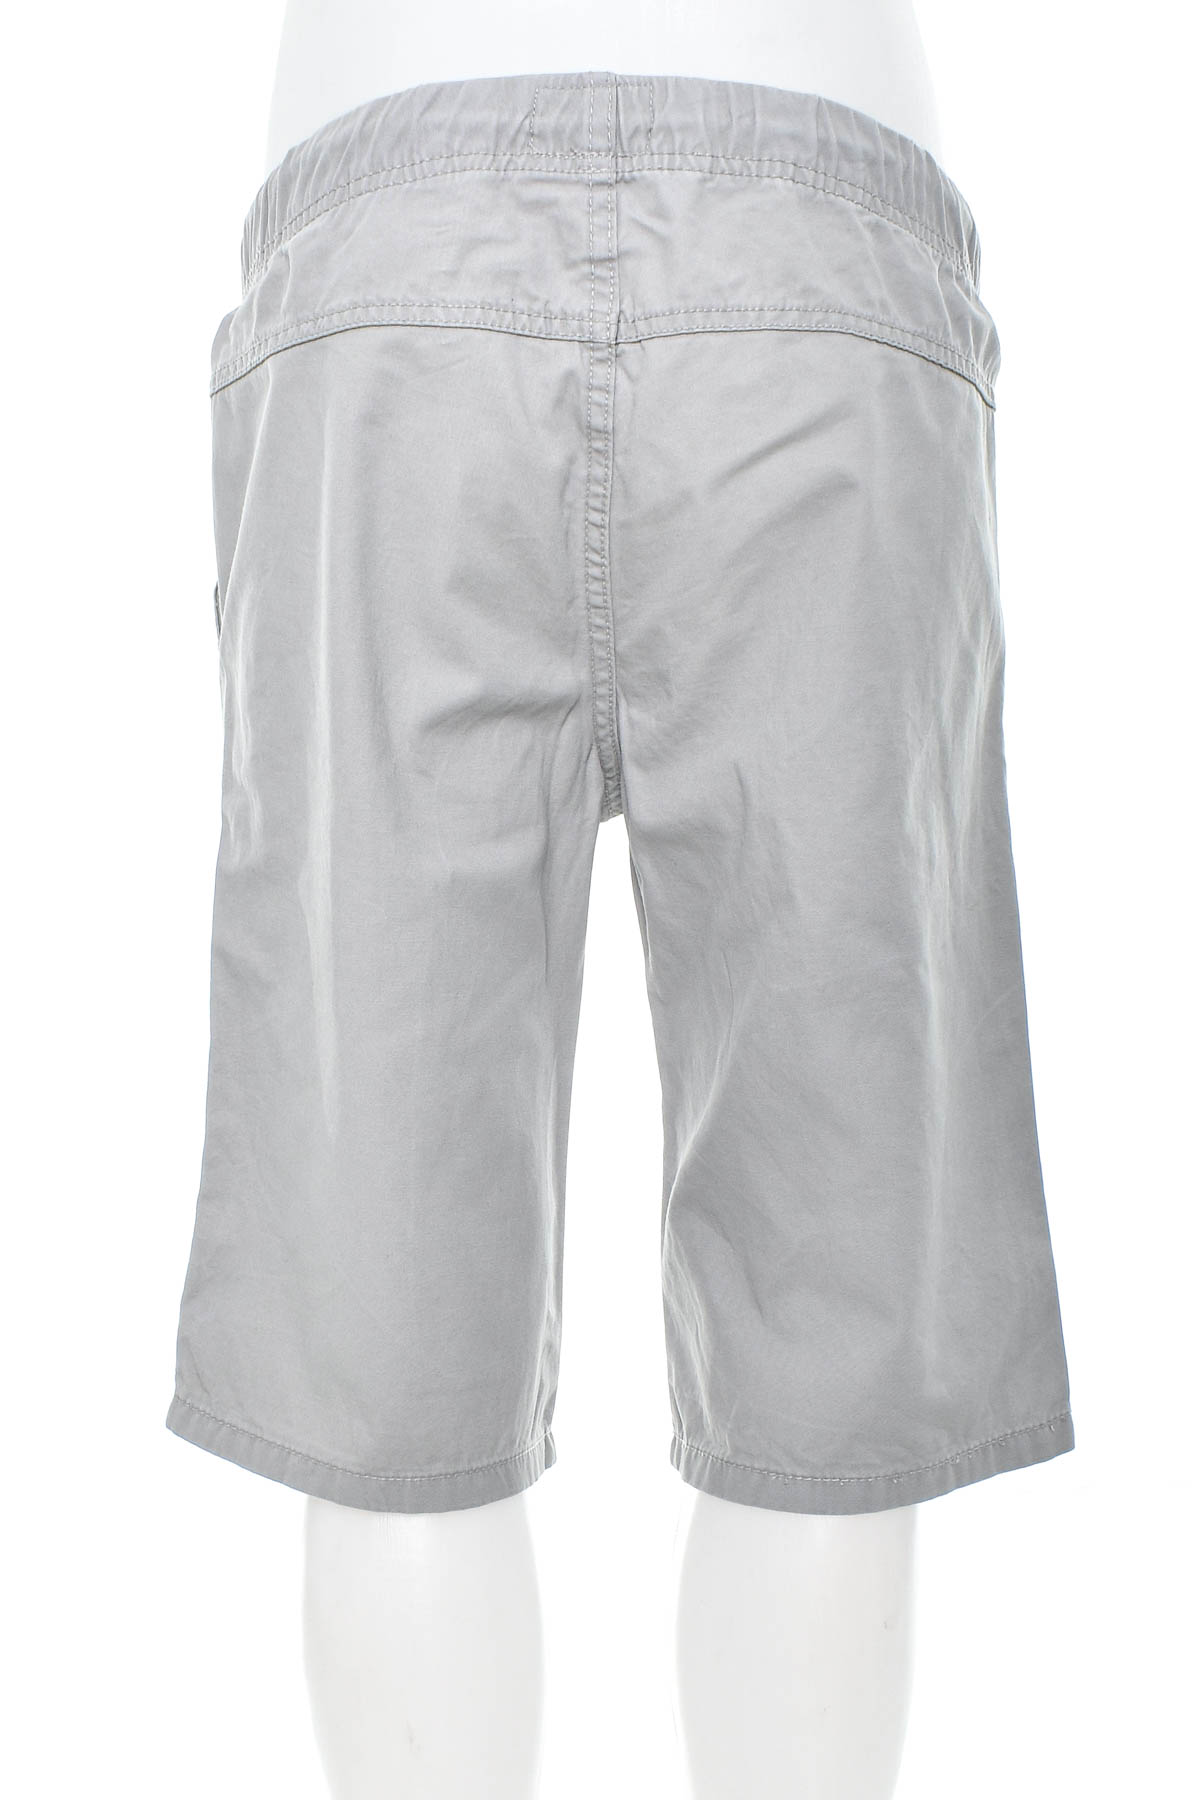 Shorts for boys - Here There - 1